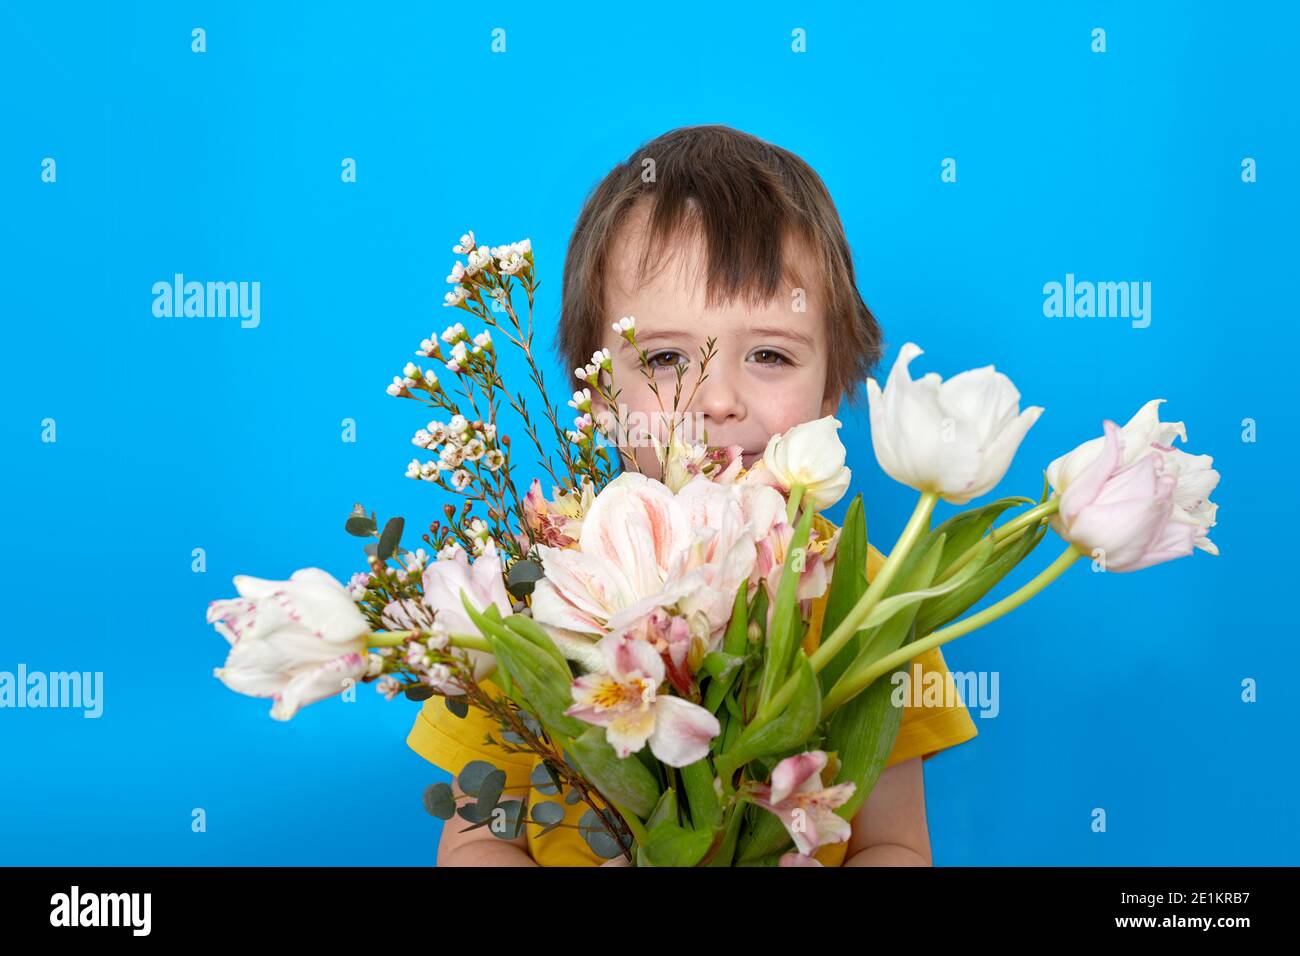 Cute boy smiling with a bouquet of tulip flowers as a gift on a blue background in studio Stock Photo